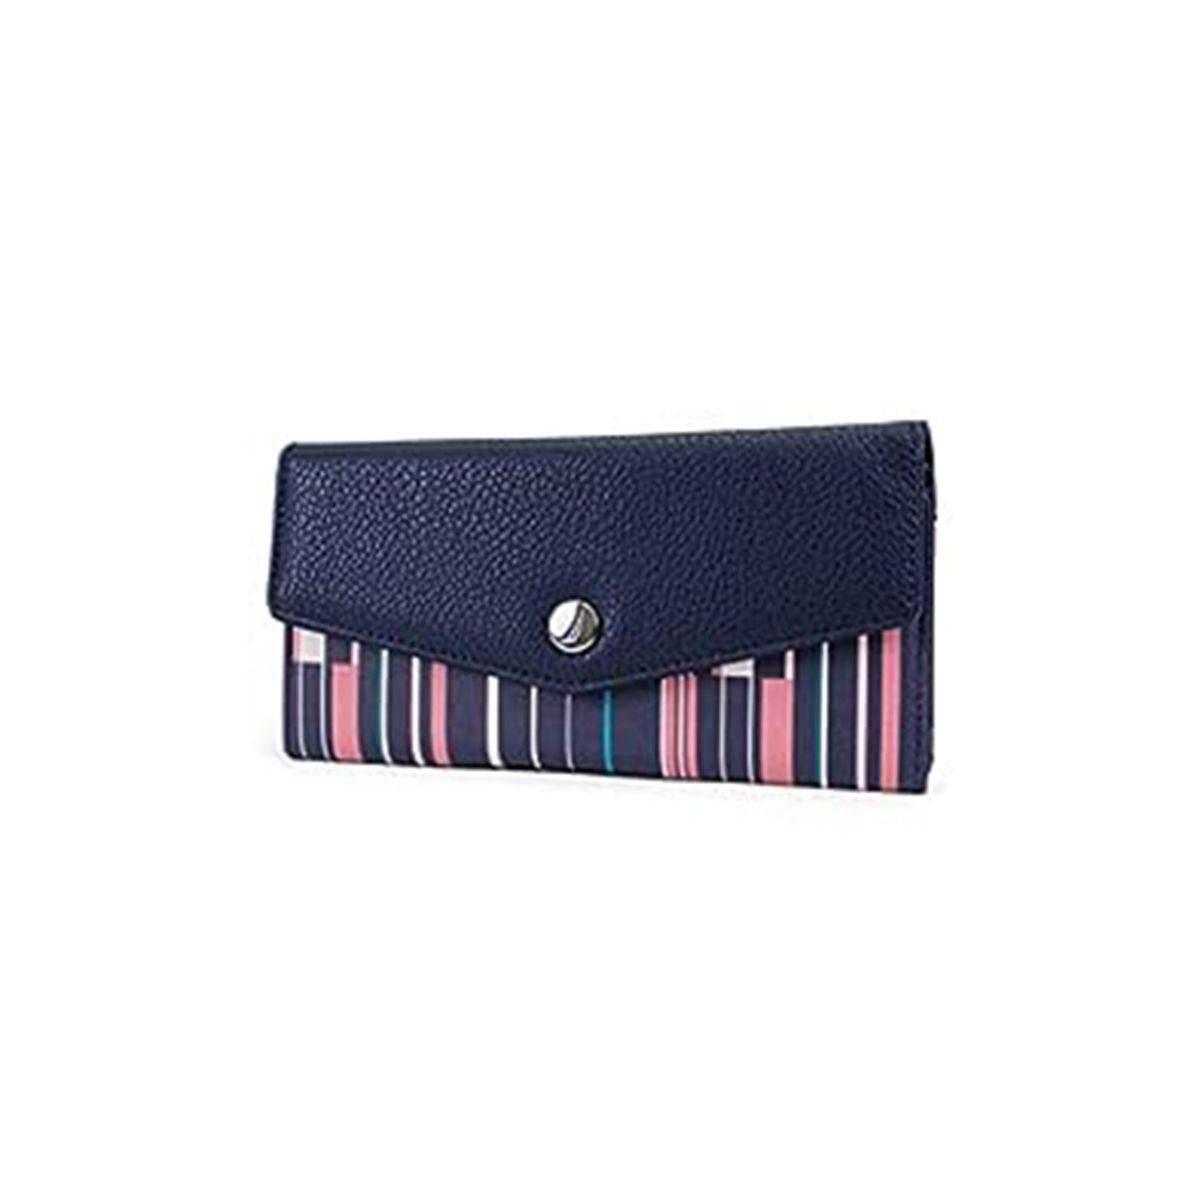 Nautica - Perfect to wear as a clutch and slim enough to fit into your purse,  this is the perfect gift for mom this Mother's Day. https://bit.ly/3gDgNrI  | Facebook